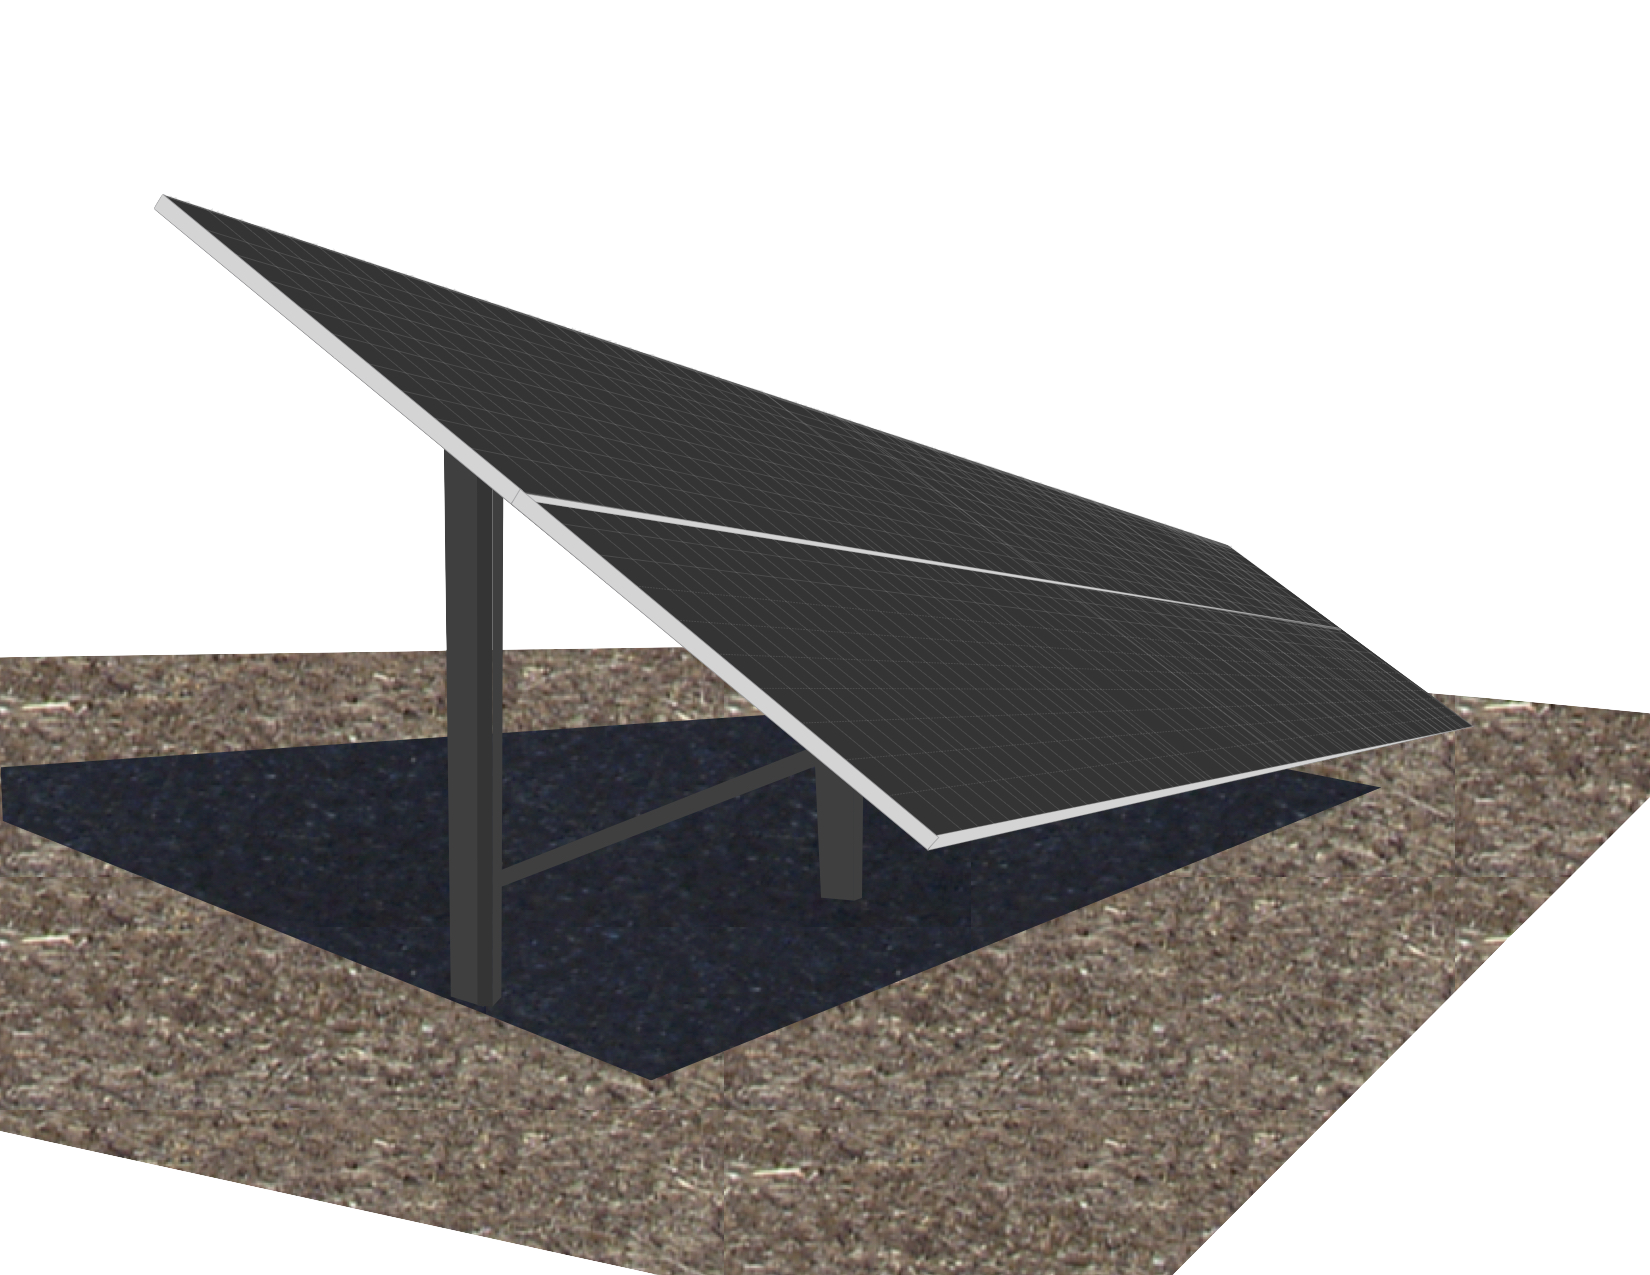 Ground-mounts allow for a perfect tilt angle and orientation resulting in optimal production. This application can be the answer for systems of any size - from small residential solar systems to large utility scale solar farms.